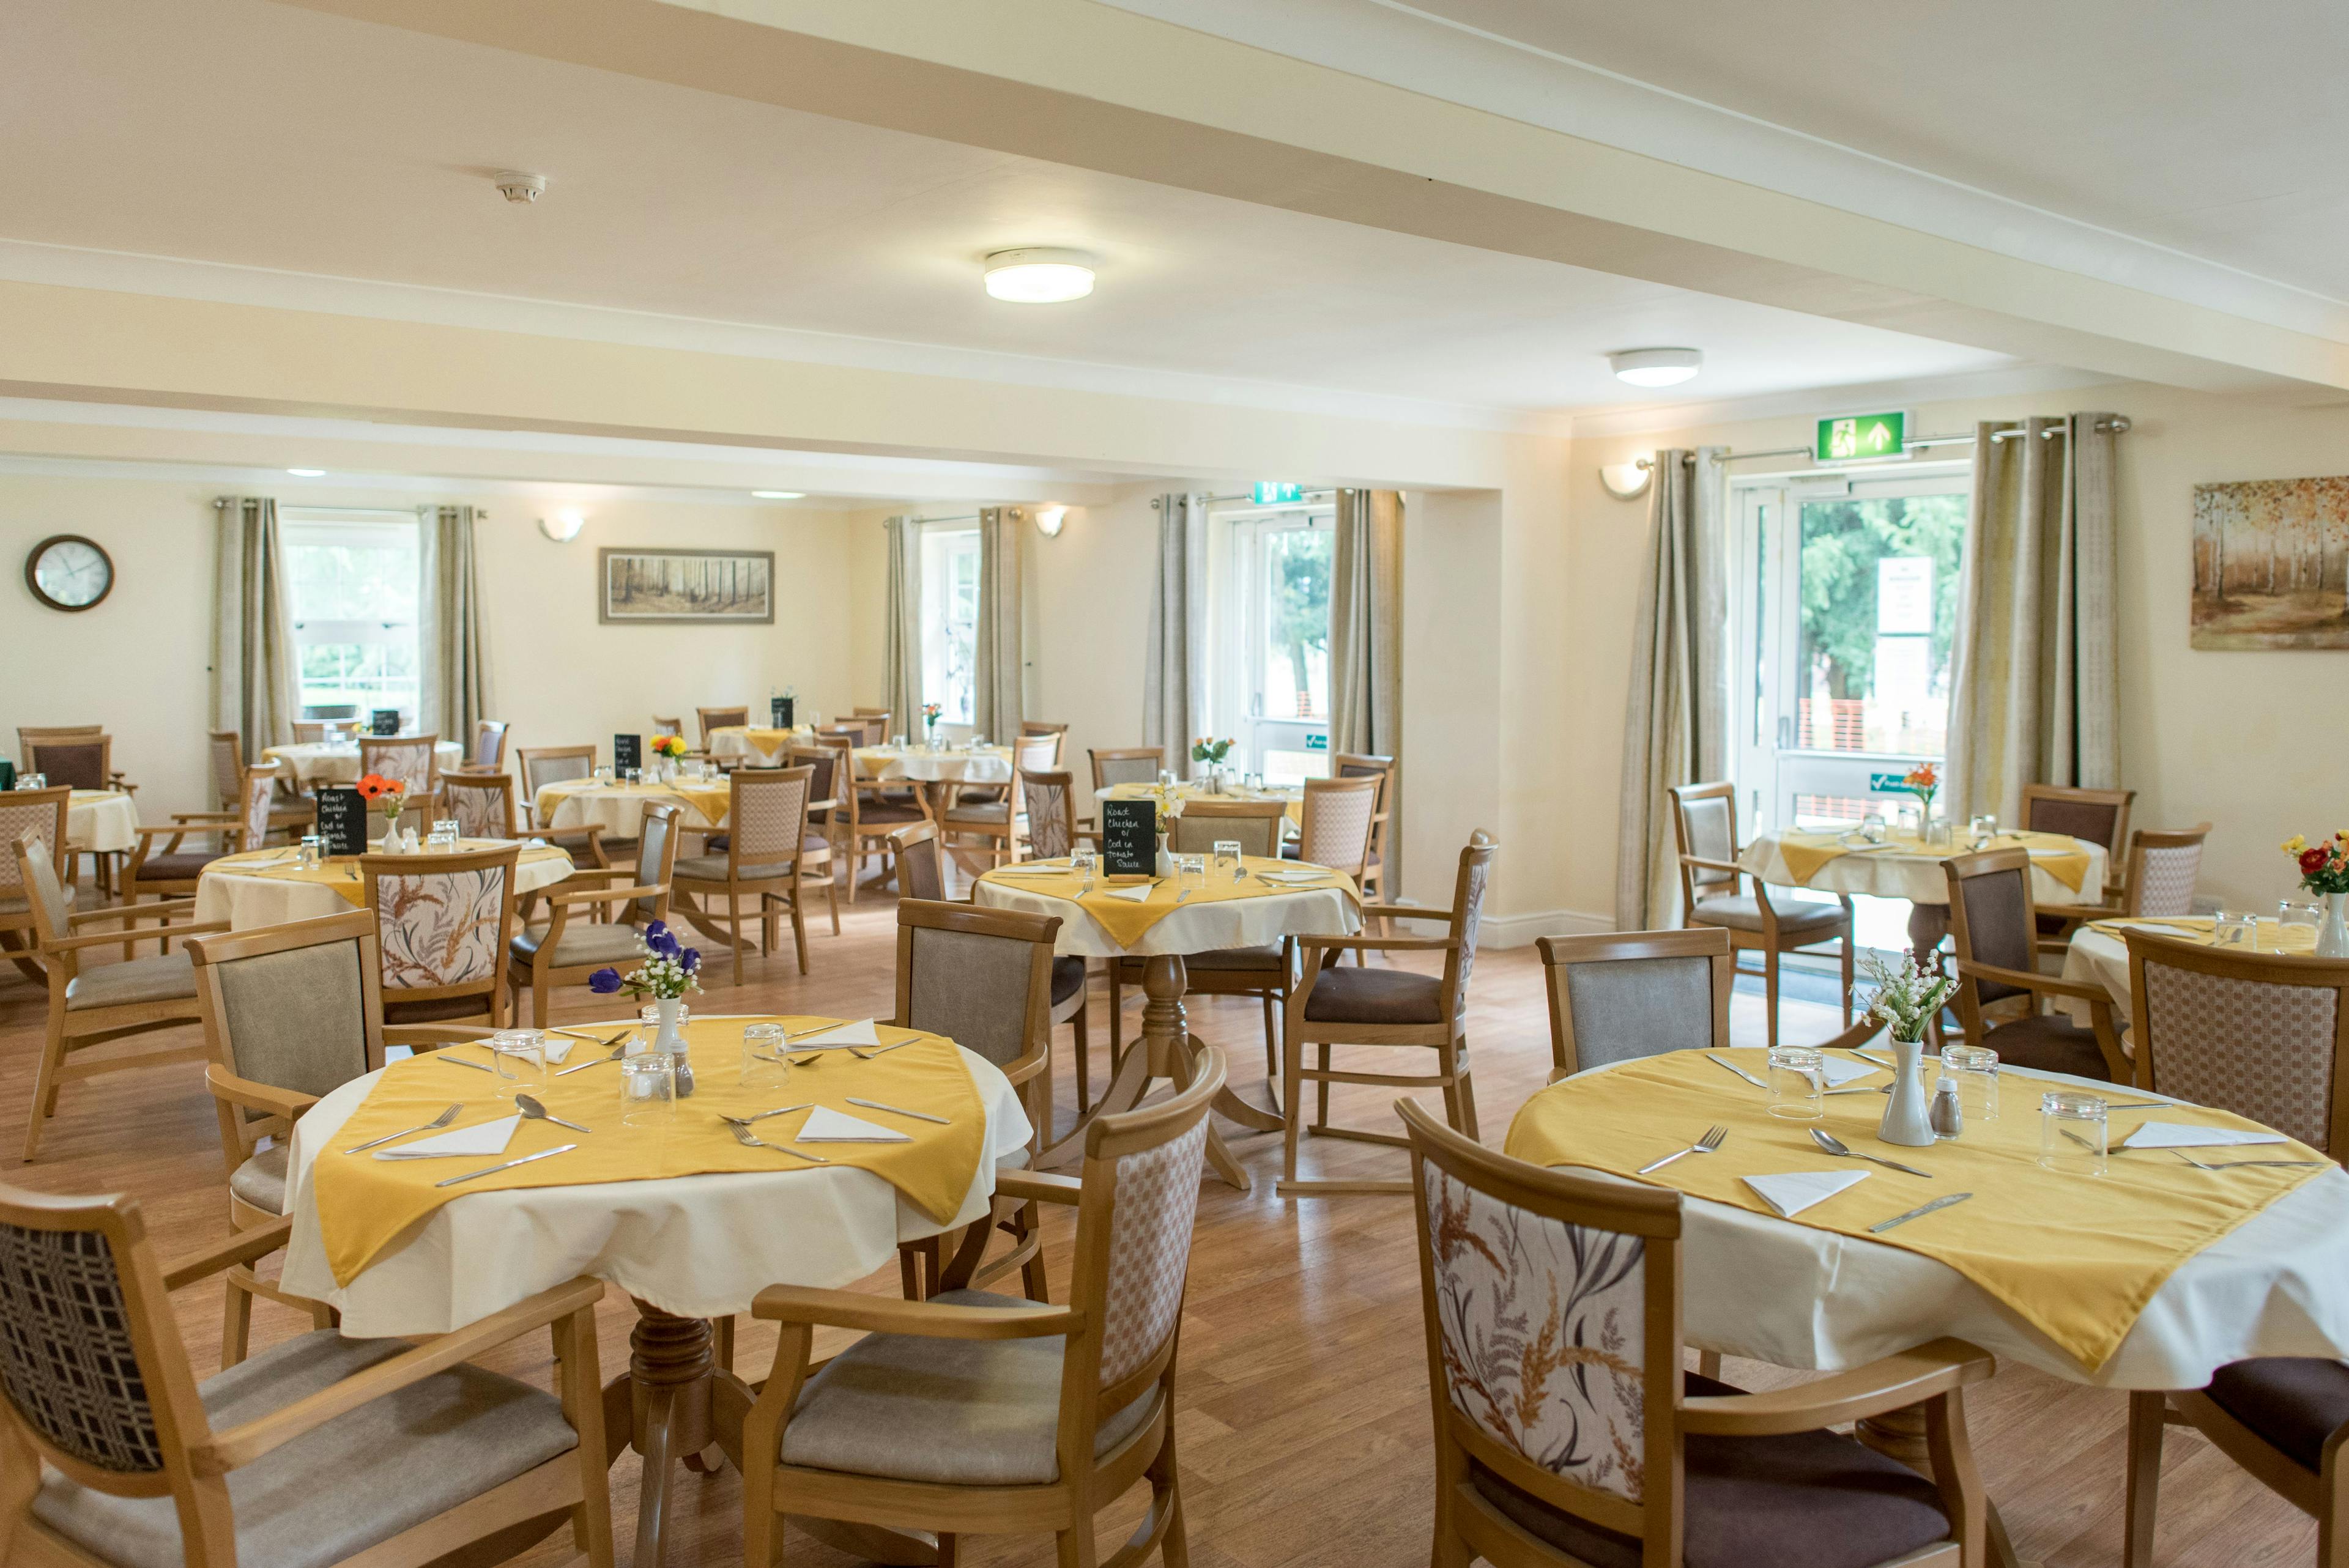 Dining room of Halstead Hall care home in Braintree, Essex